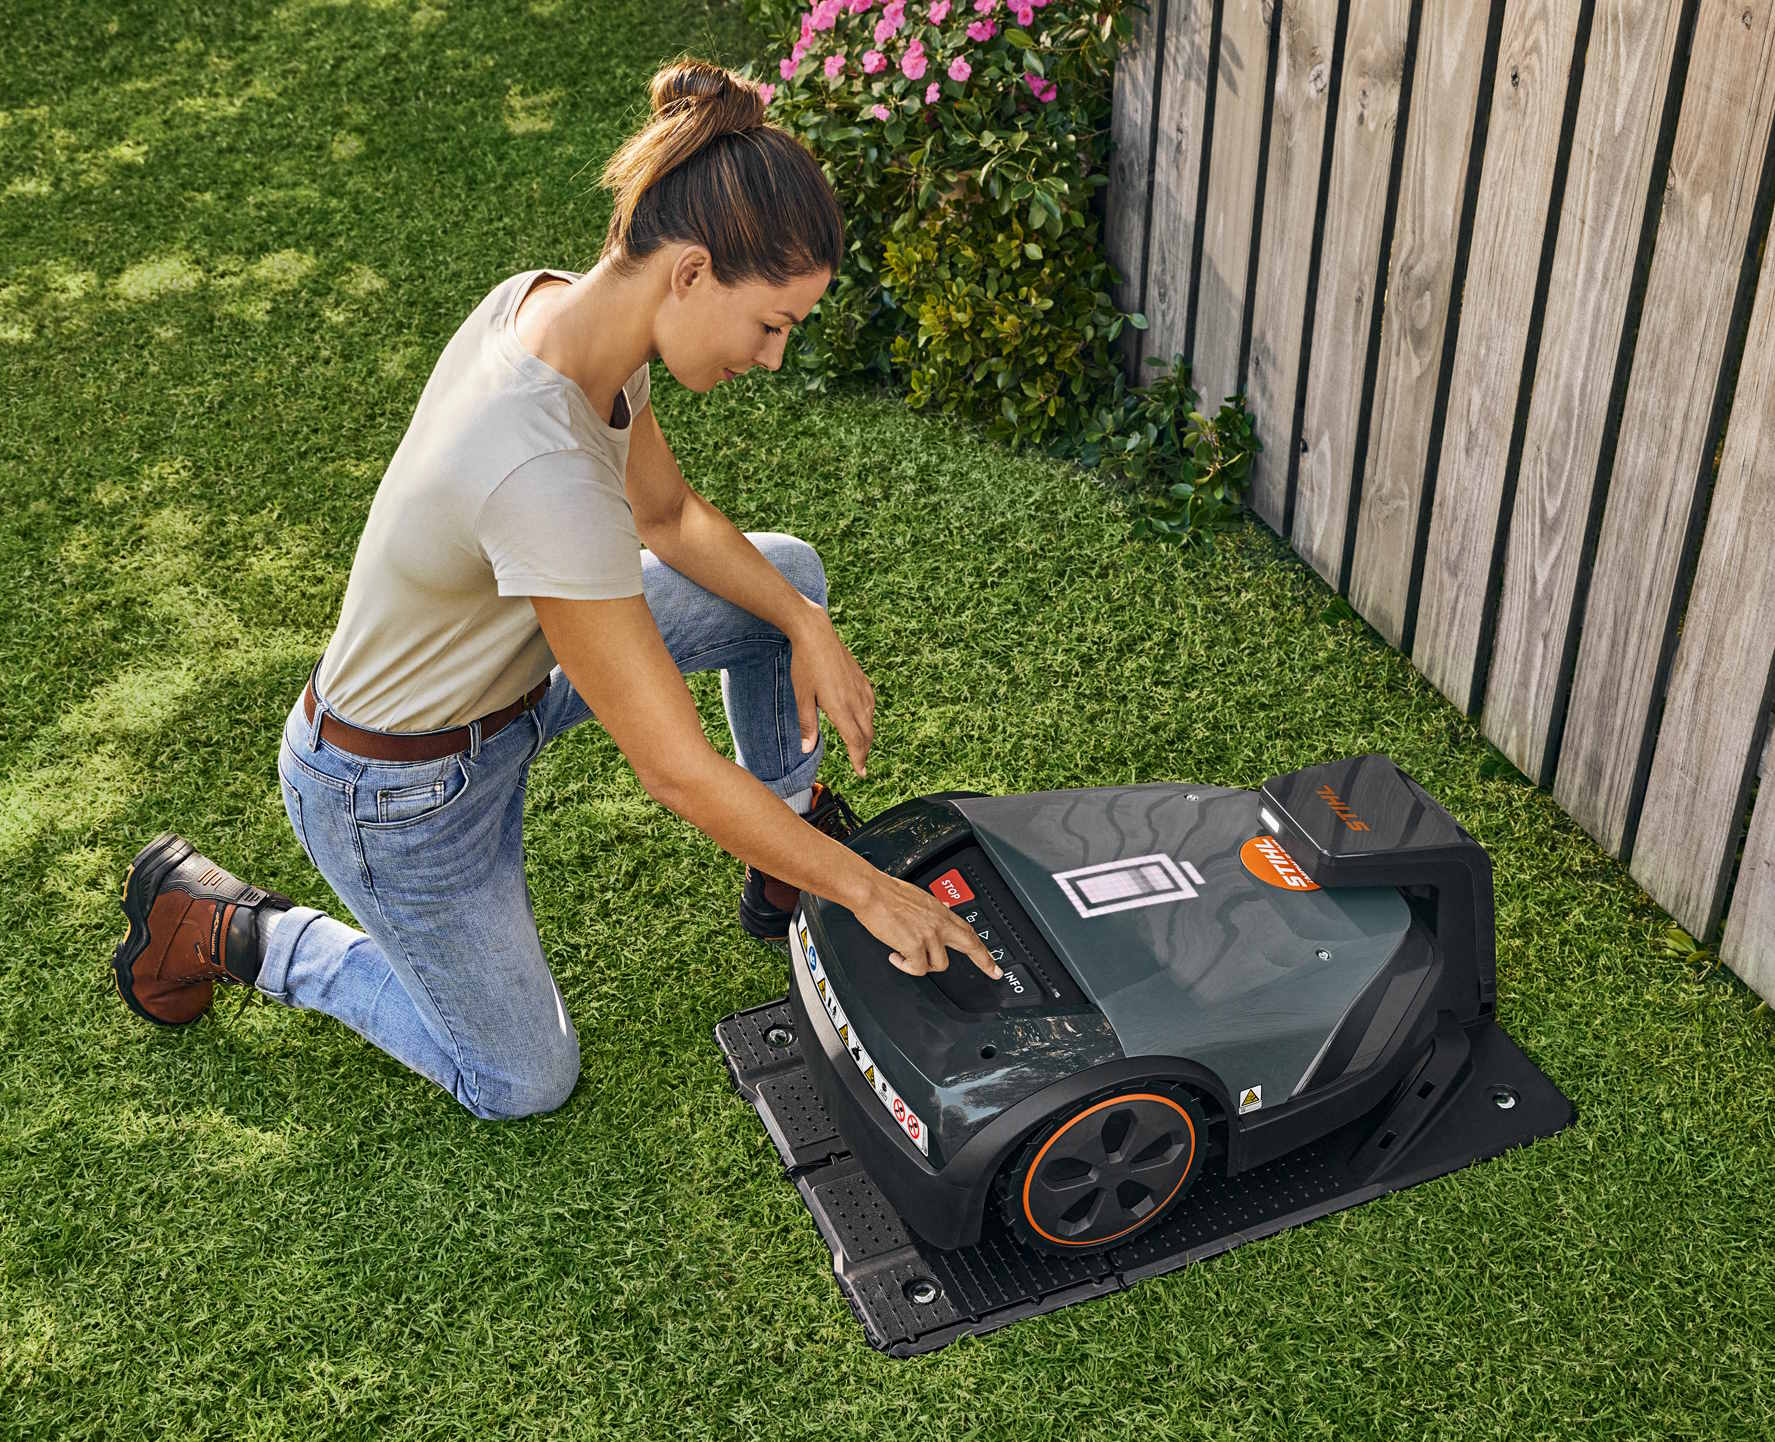 dyd Tomhed gøre ondt STIHL iMOW new robot lawn mower pricing unveiled - NotebookCheck.net News